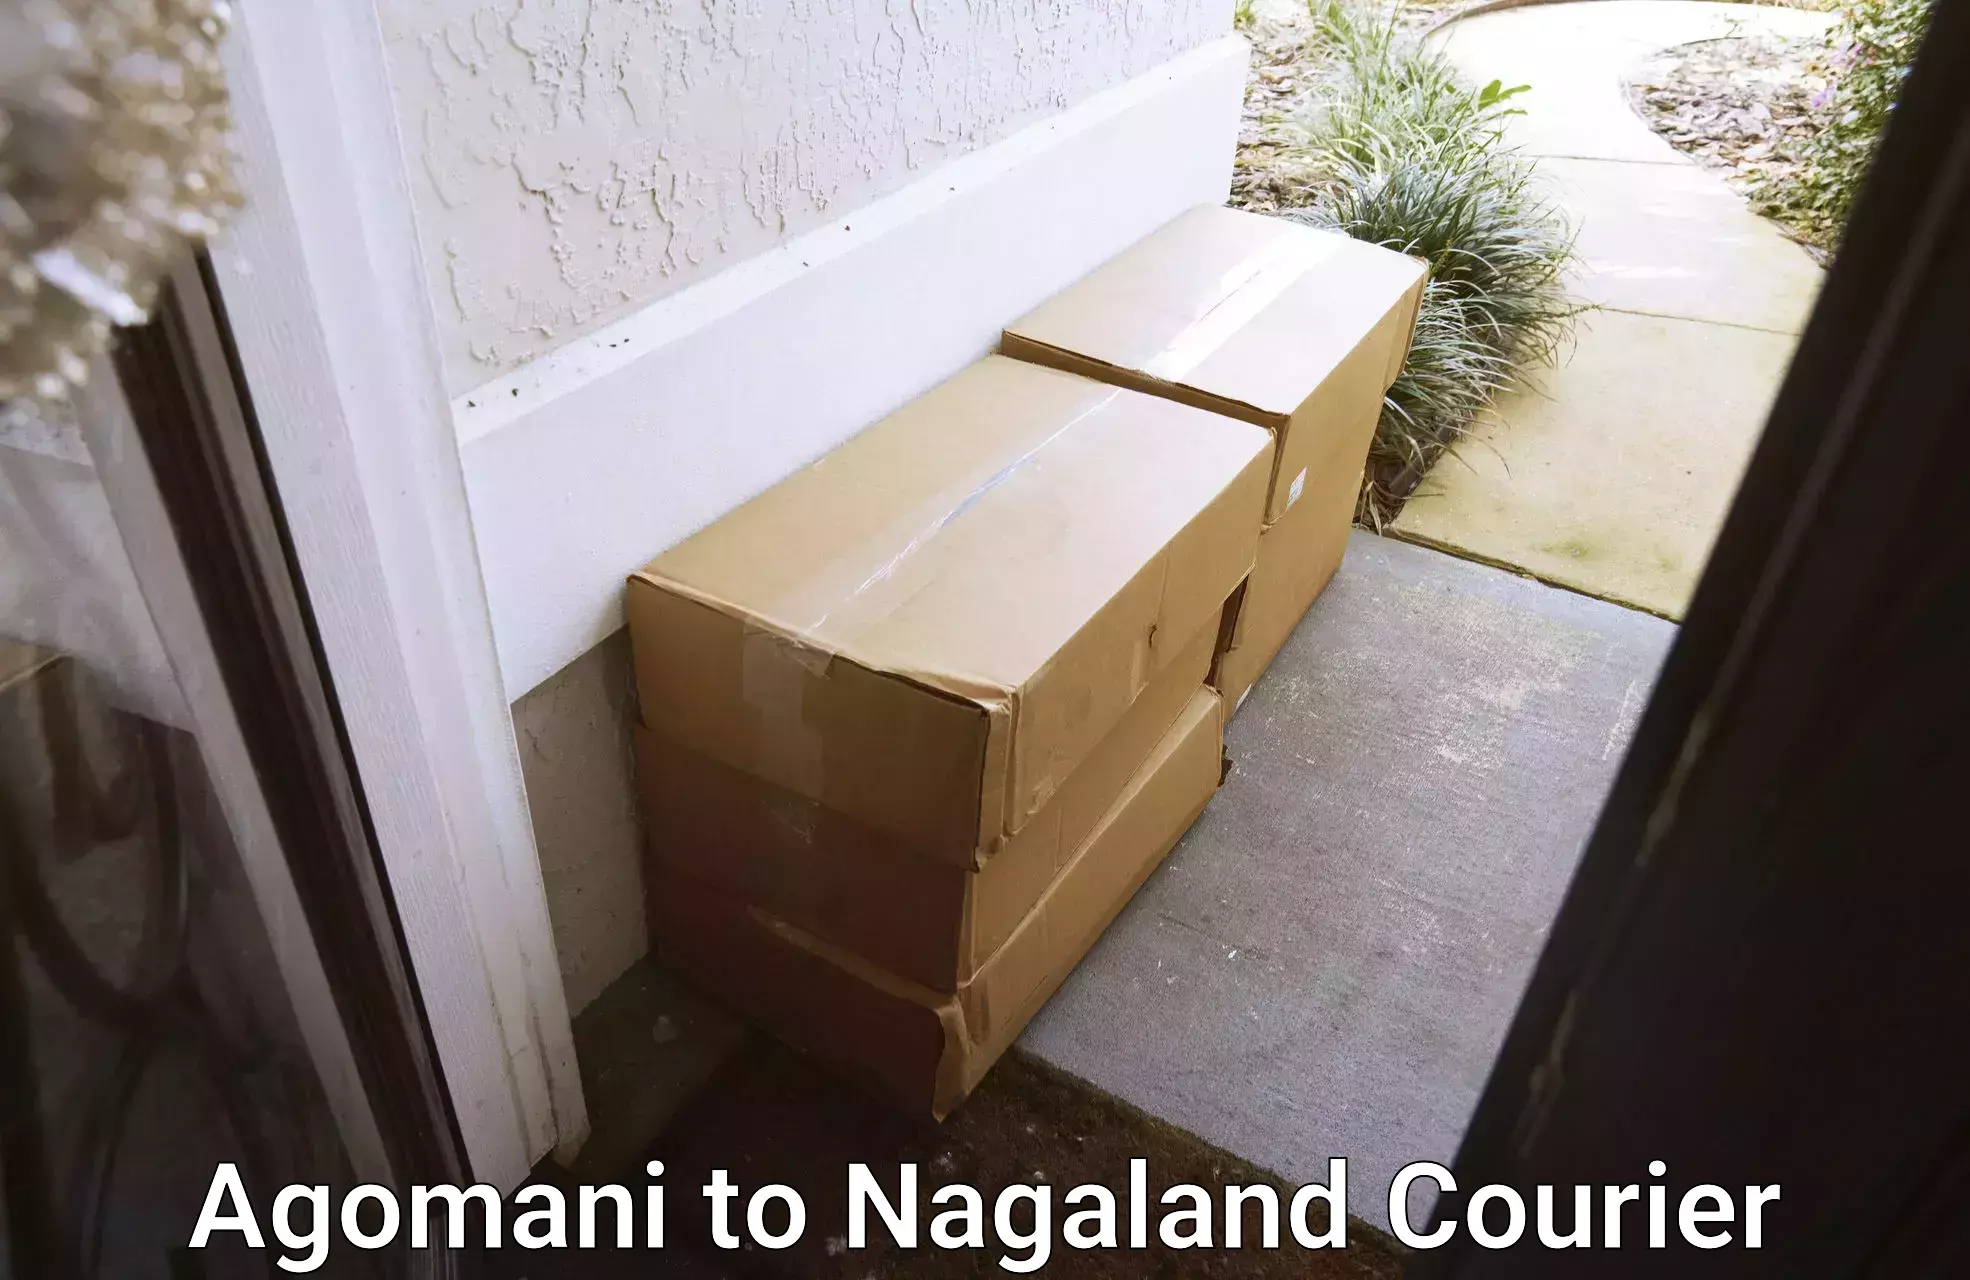 Nationwide delivery network Agomani to Mon